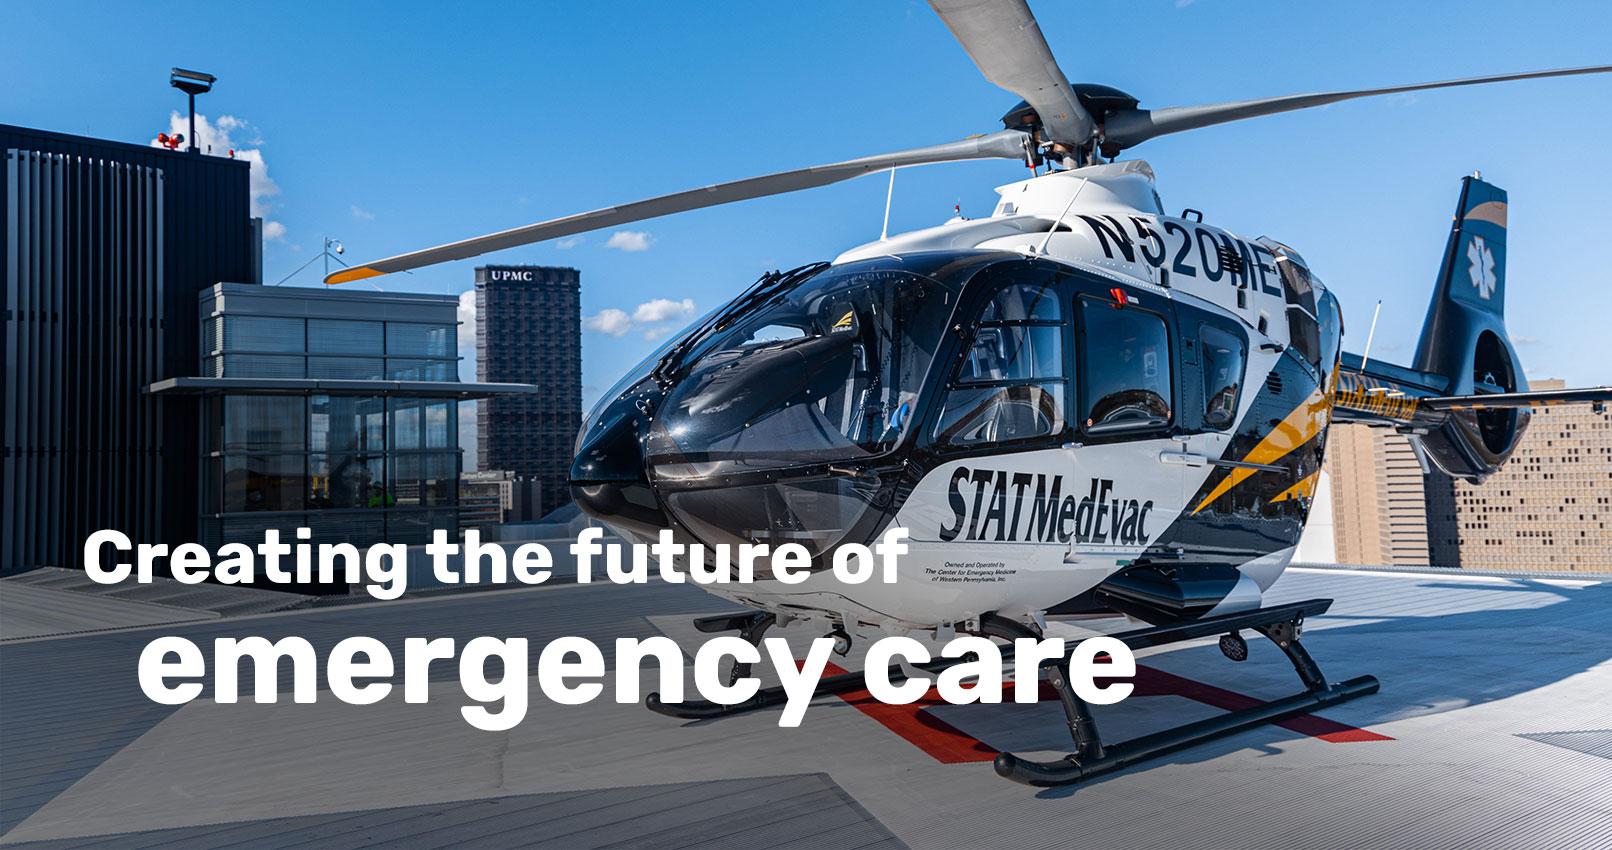 Helicopter Image with Creating the Future of emergency care